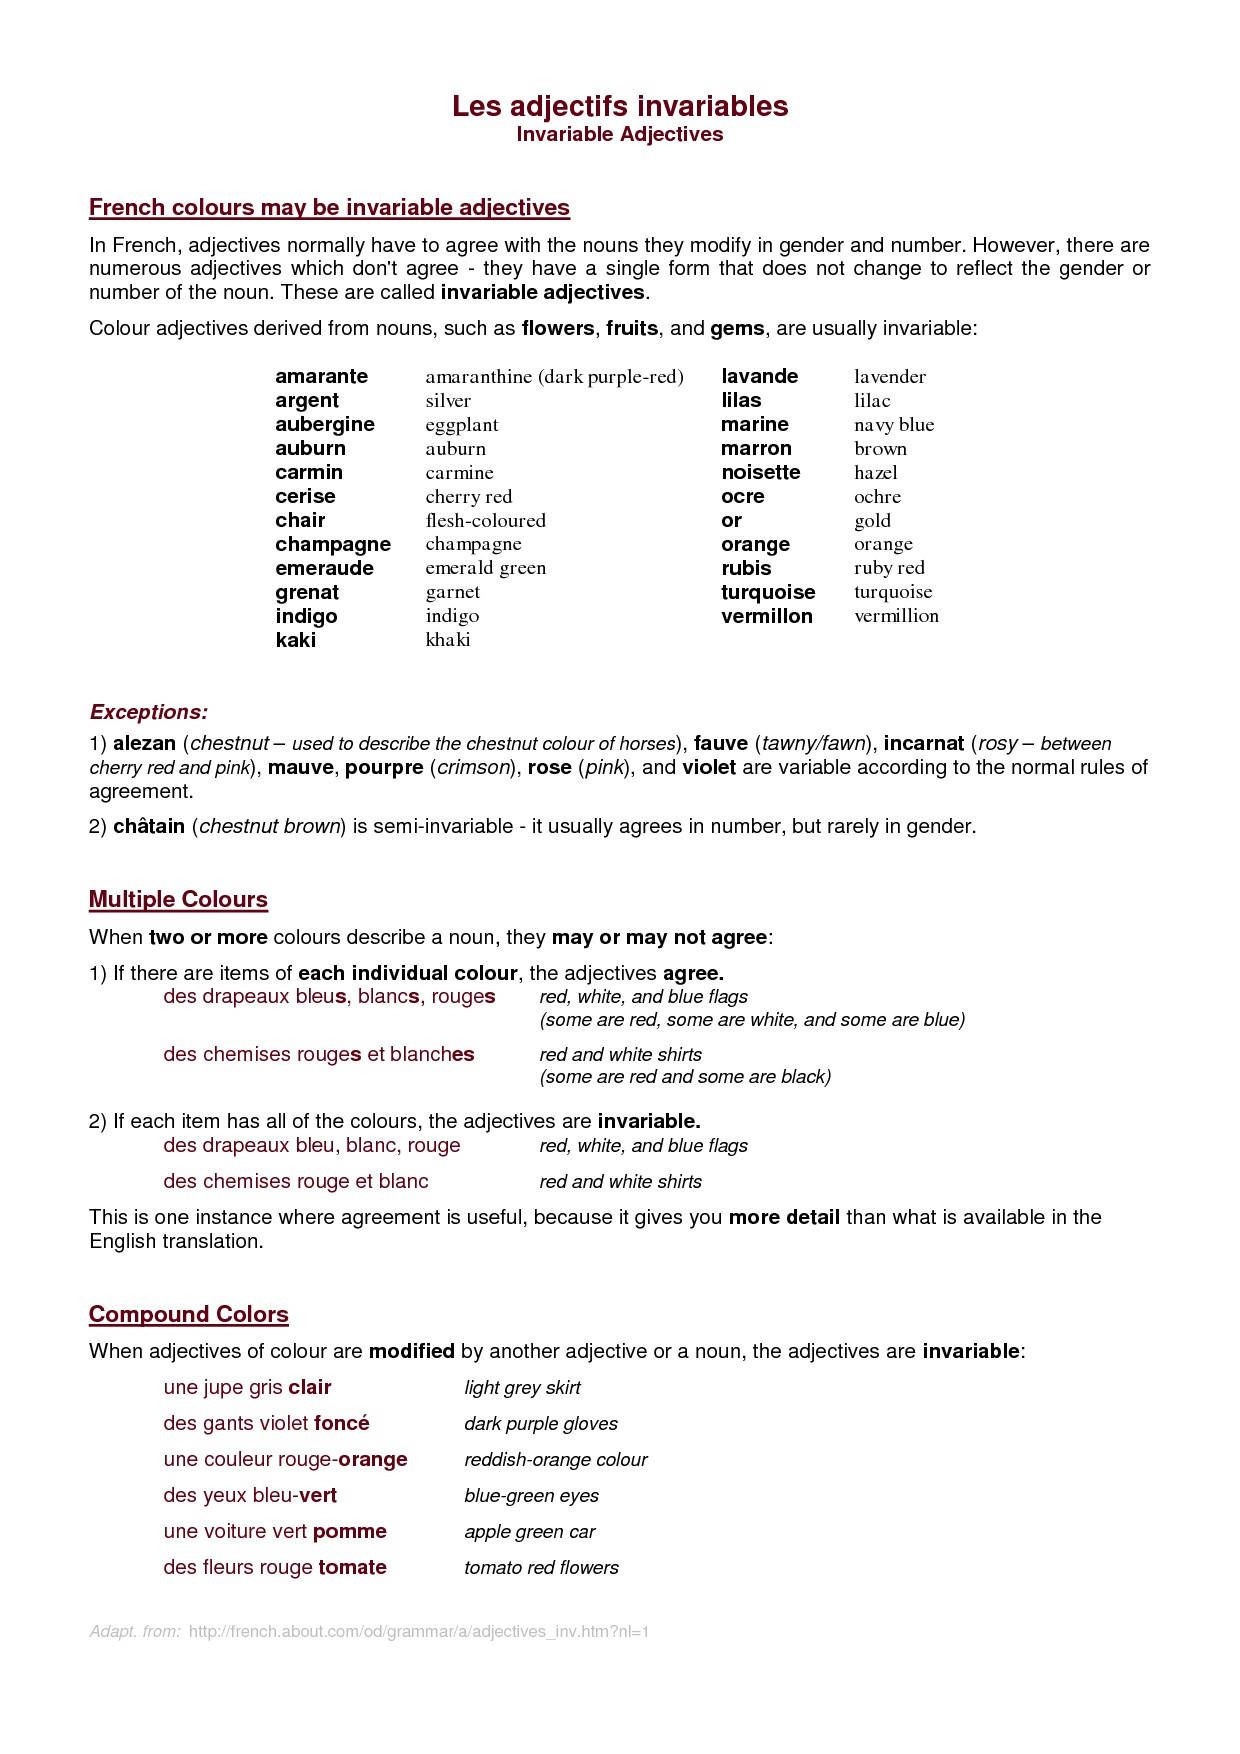 communicating-in-english-adjectives-word-order-ii